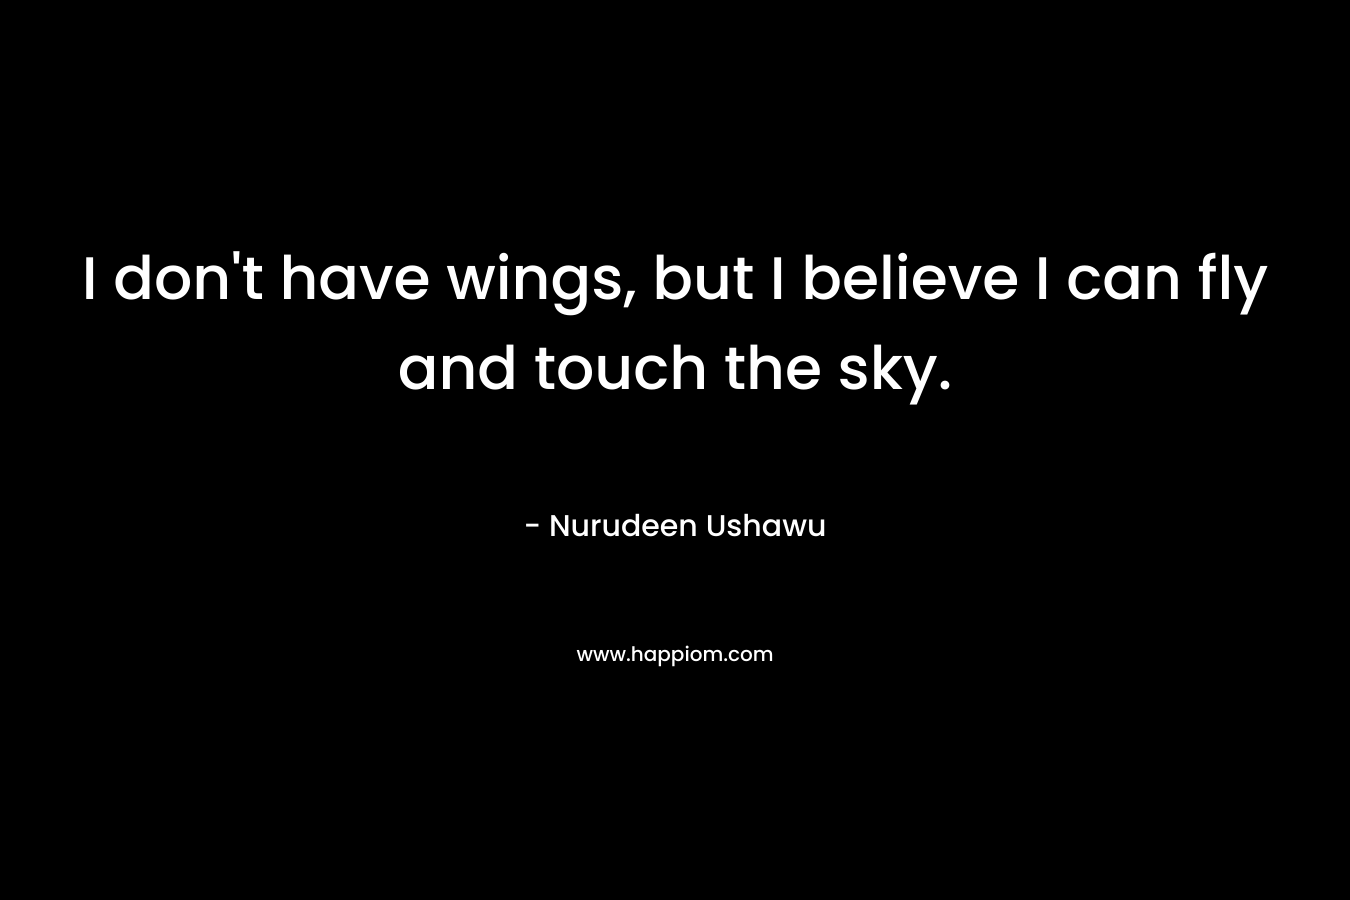 I don't have wings, but I believe I can fly and touch the sky.